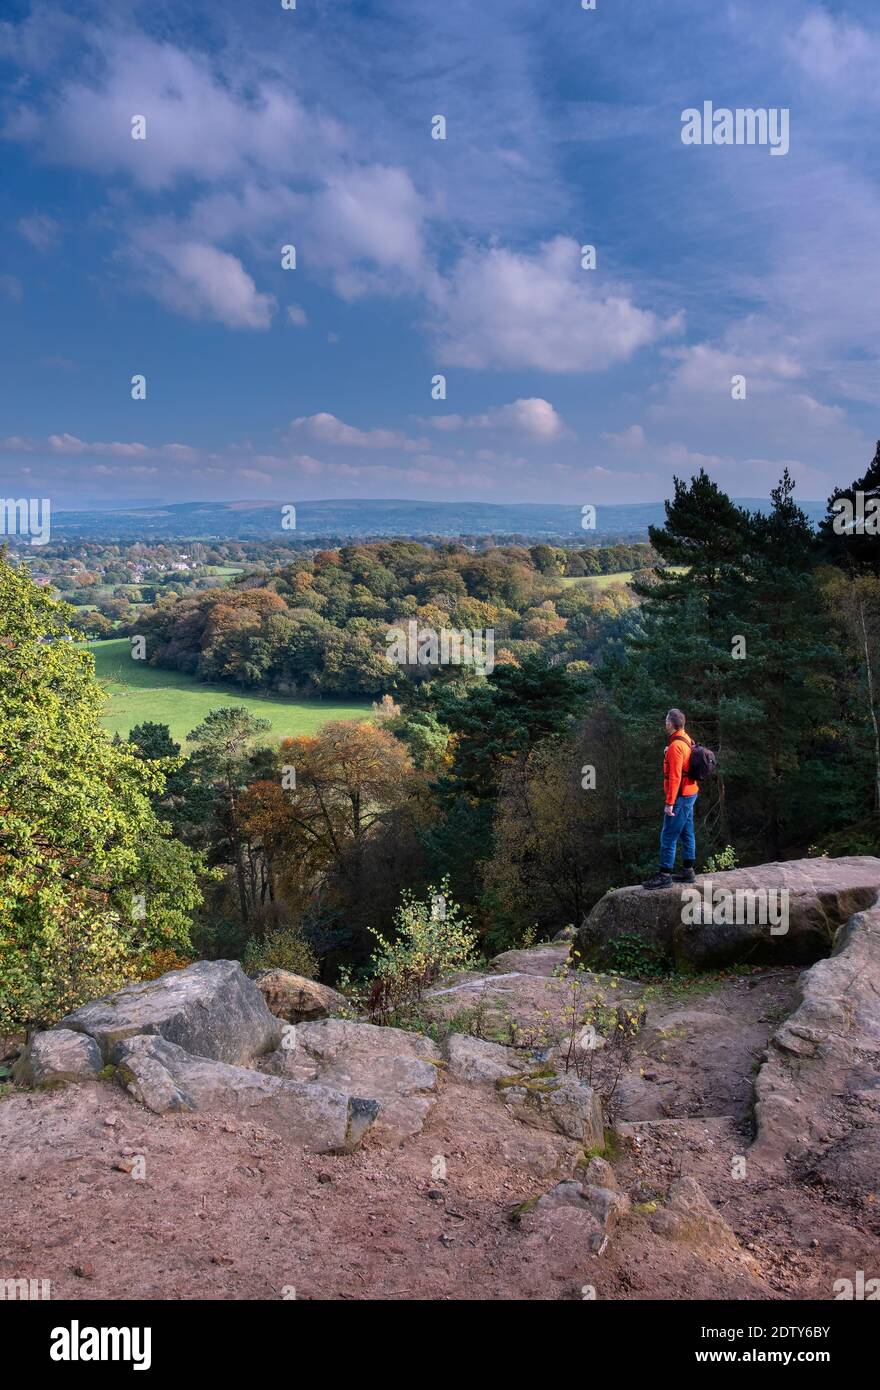 Walker at Stormy Point looking out over the Cheshire Plain in autumn, Alderley Edge, Cheshire, England, UK Stock Photo